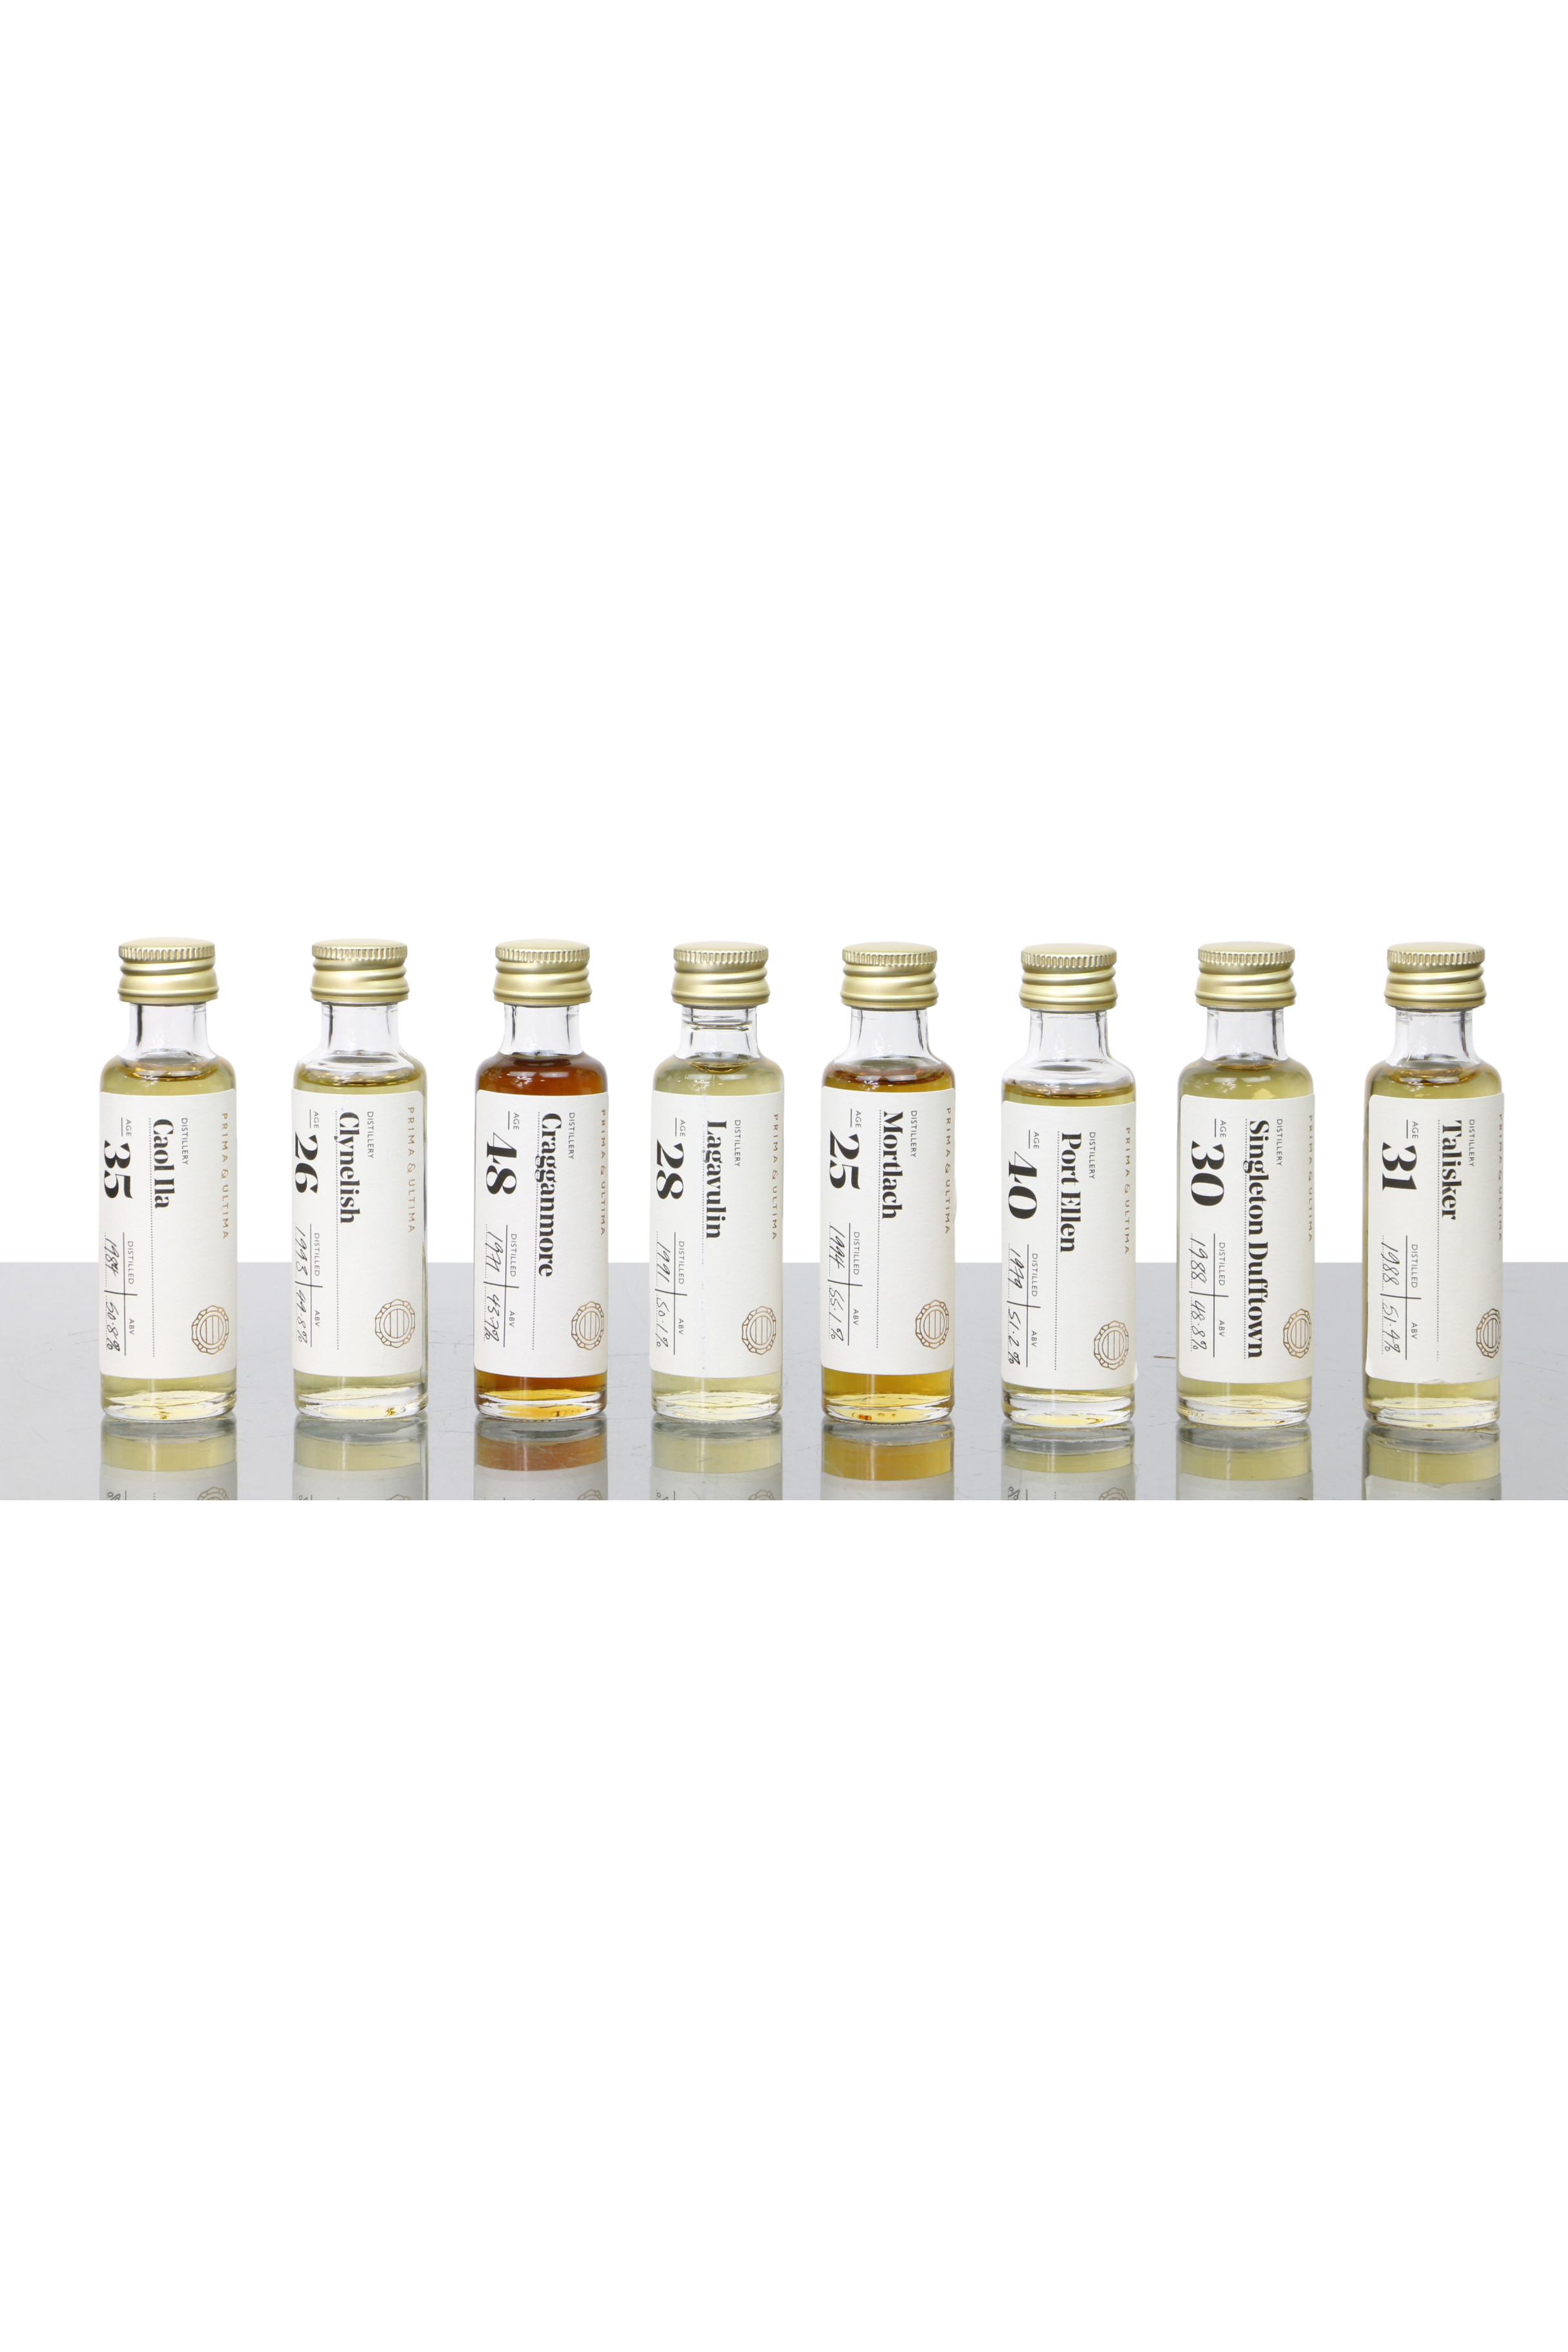 Diageo Prima And Ultima 2020 Collection Sample Pack 8x2cl Just